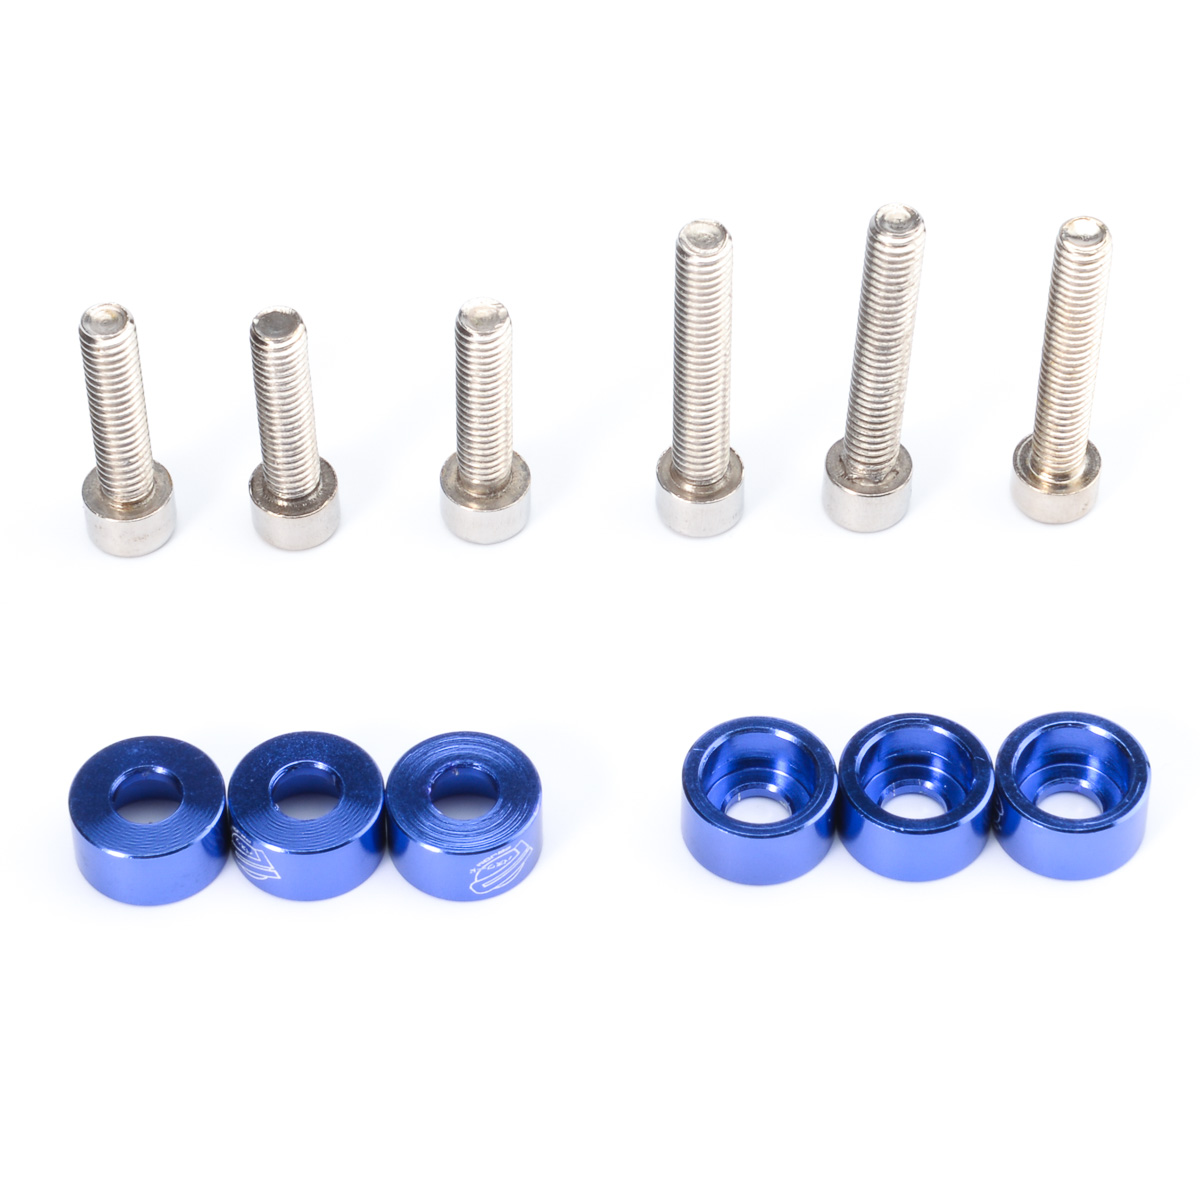 6pcs lot Blue JDM Car Gasket Screw Compartment Inlet pipe Auto Engine Parts suit Cup Washers